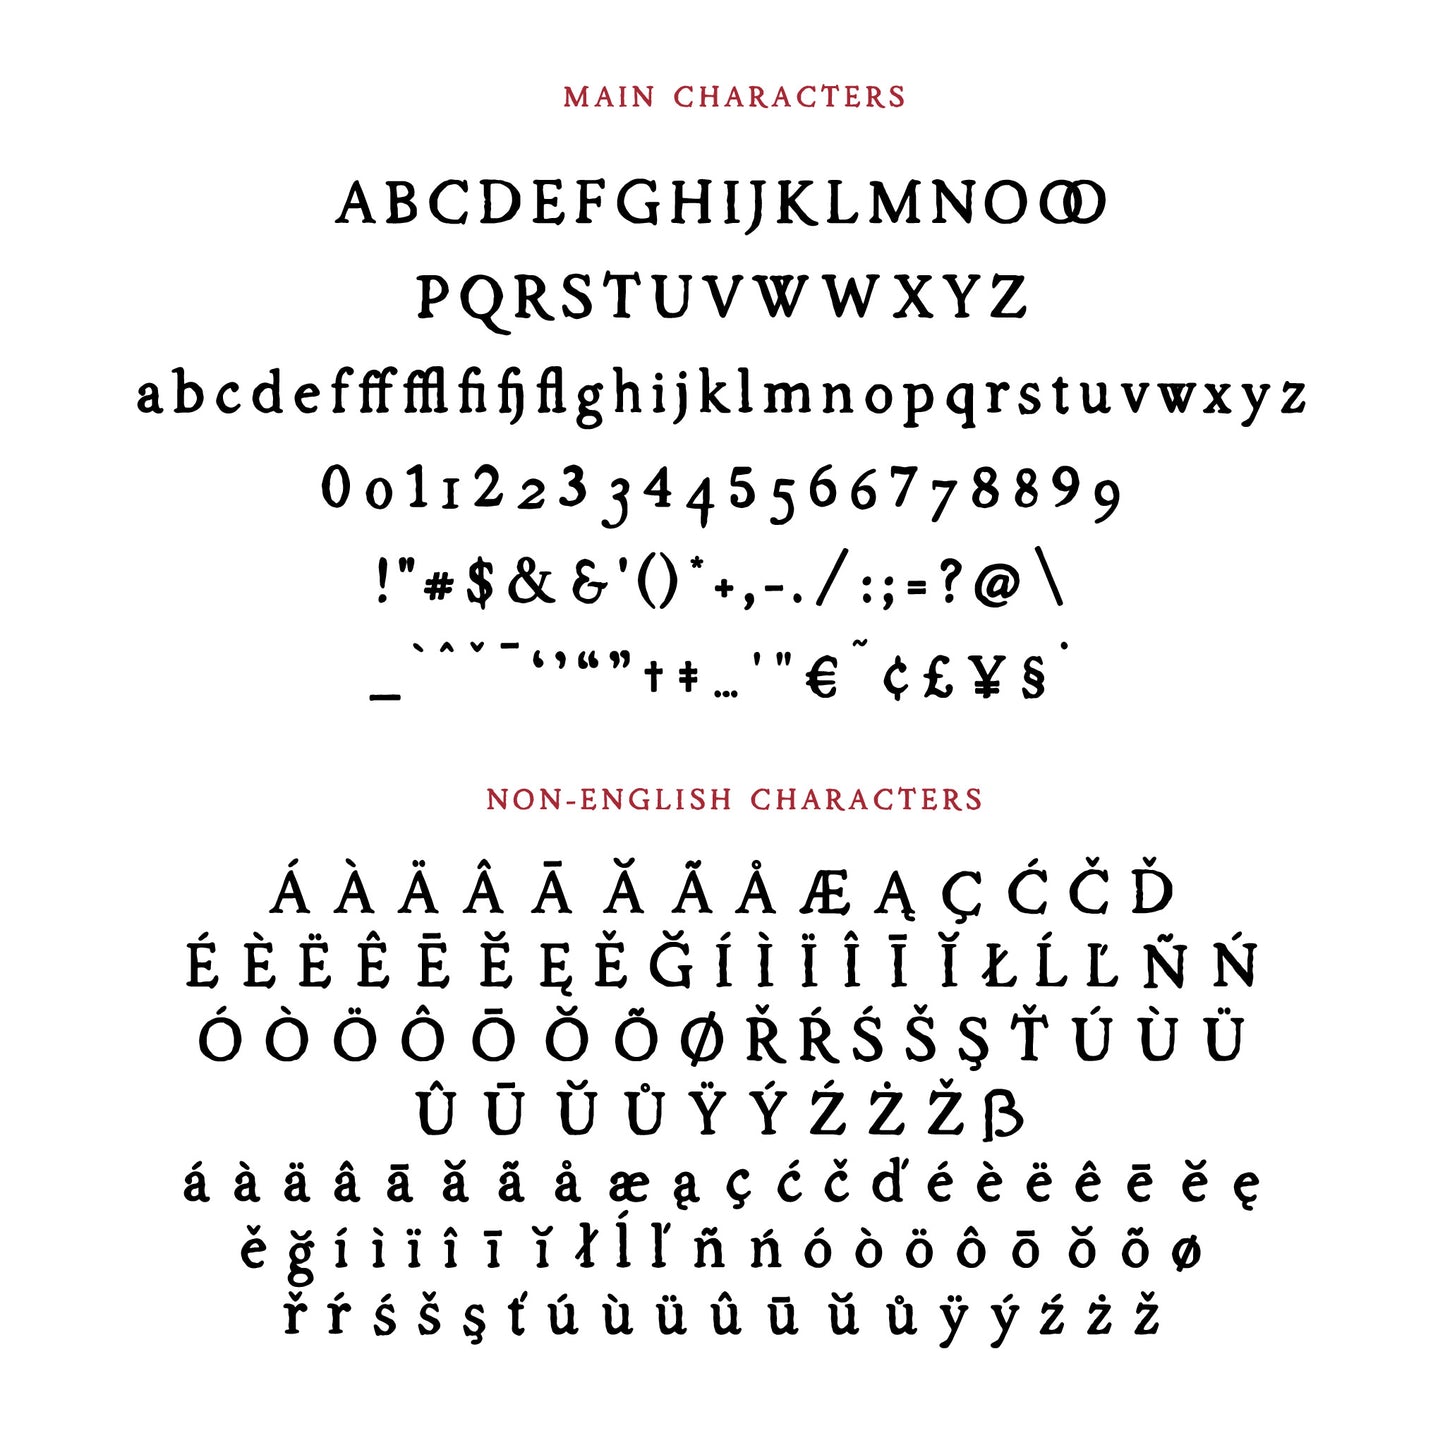 All the characters of the Folklore font set in black on a white paper background